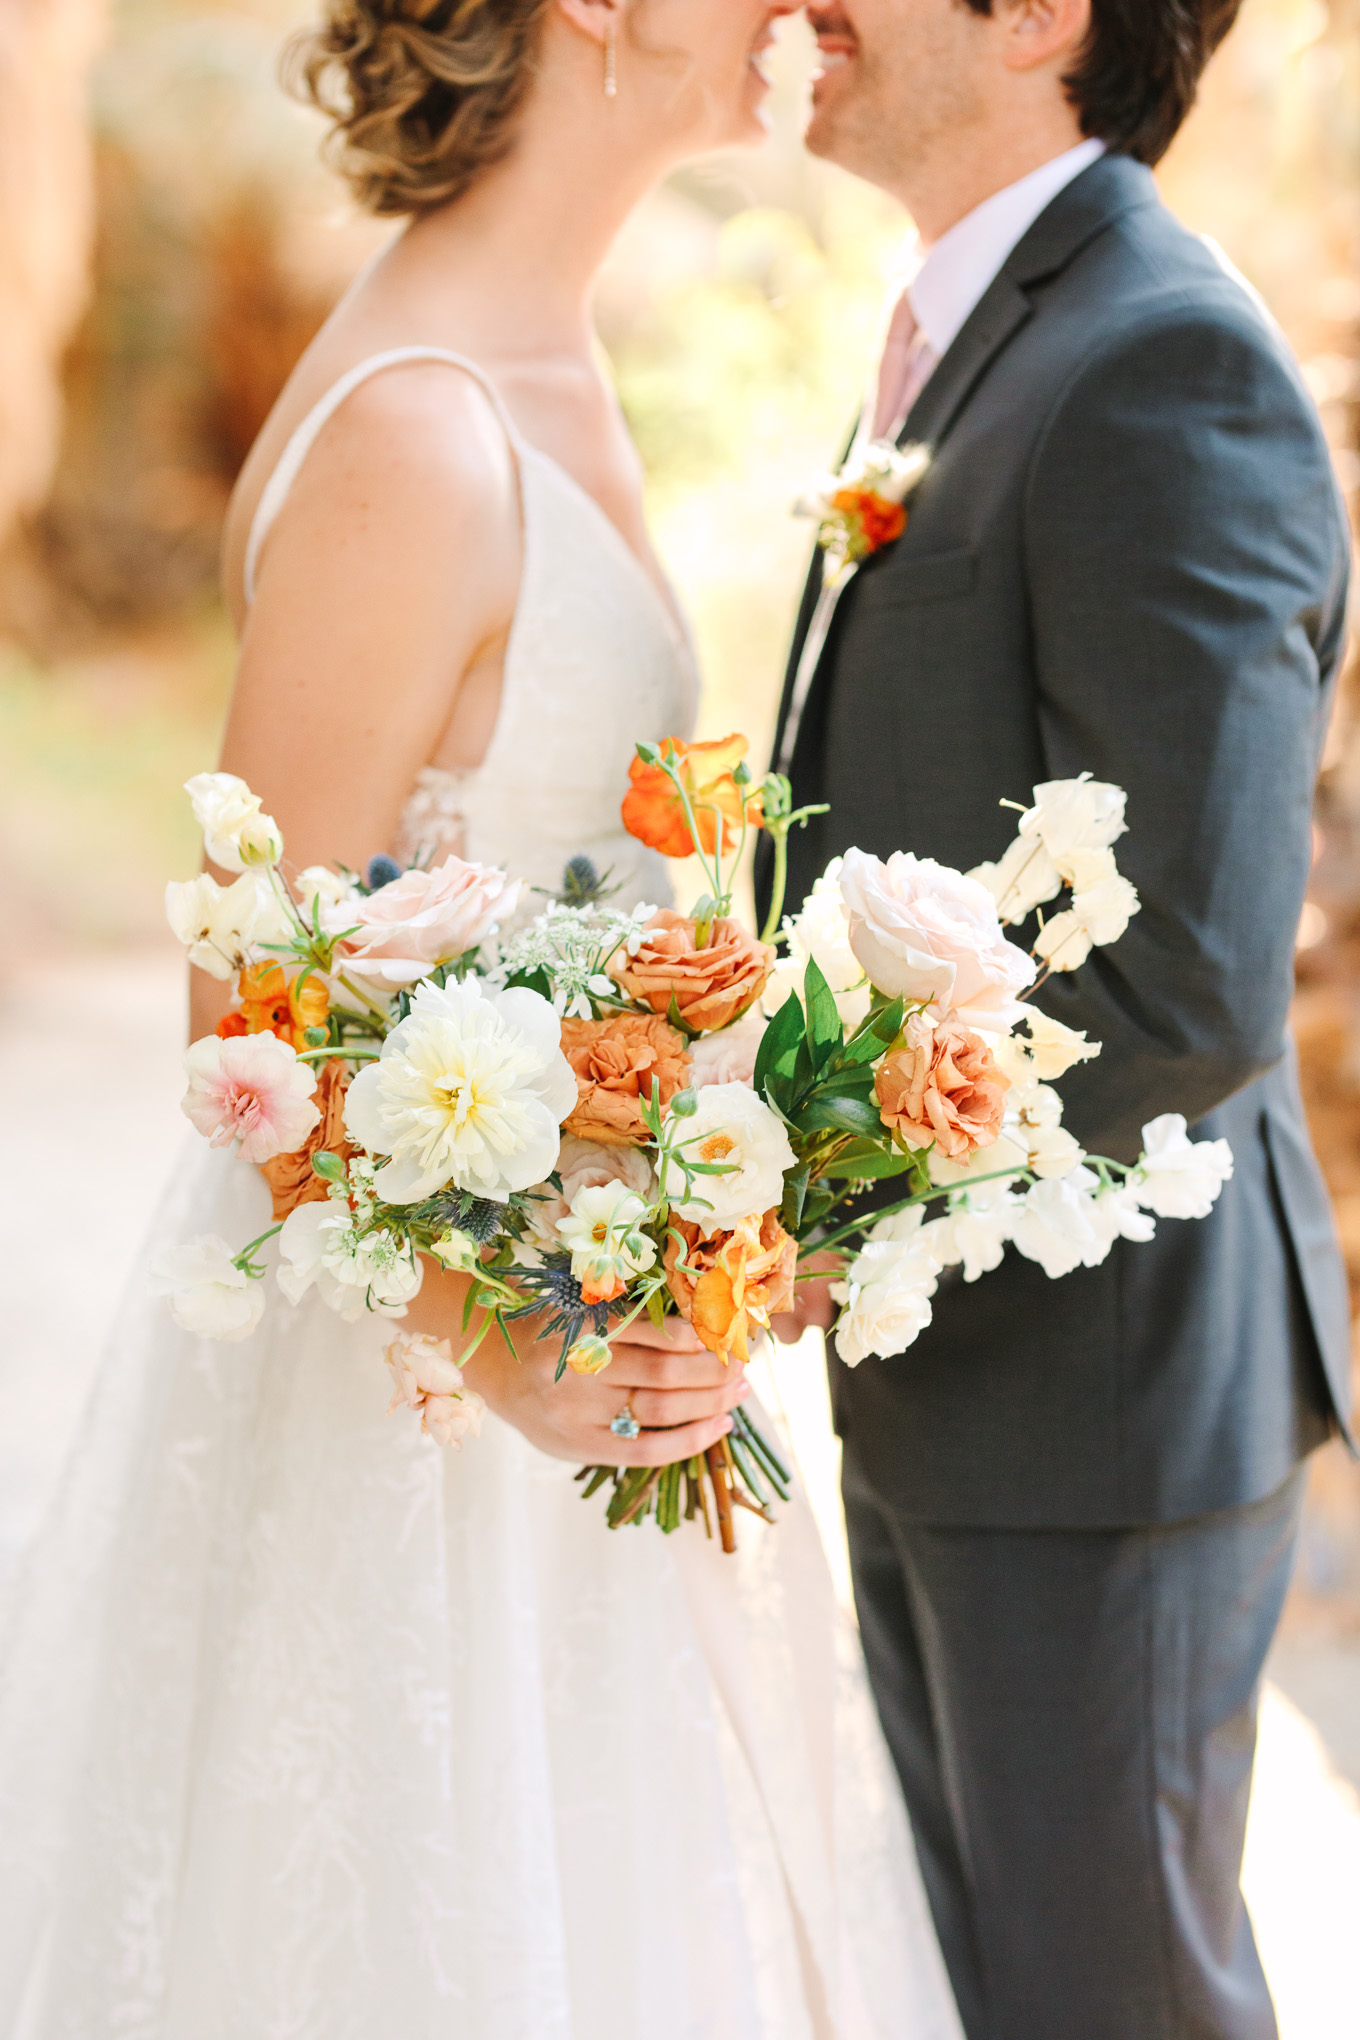 Bouquet close up at Living Desert Zoo | Best Southern California Garden Wedding Venues | Colorful and elevated wedding photography for fun-loving couples | #gardenvenue #weddingvenue #socalweddingvenue #bouquetideas #uniquebouquet   Source: Mary Costa Photography | Los Angeles